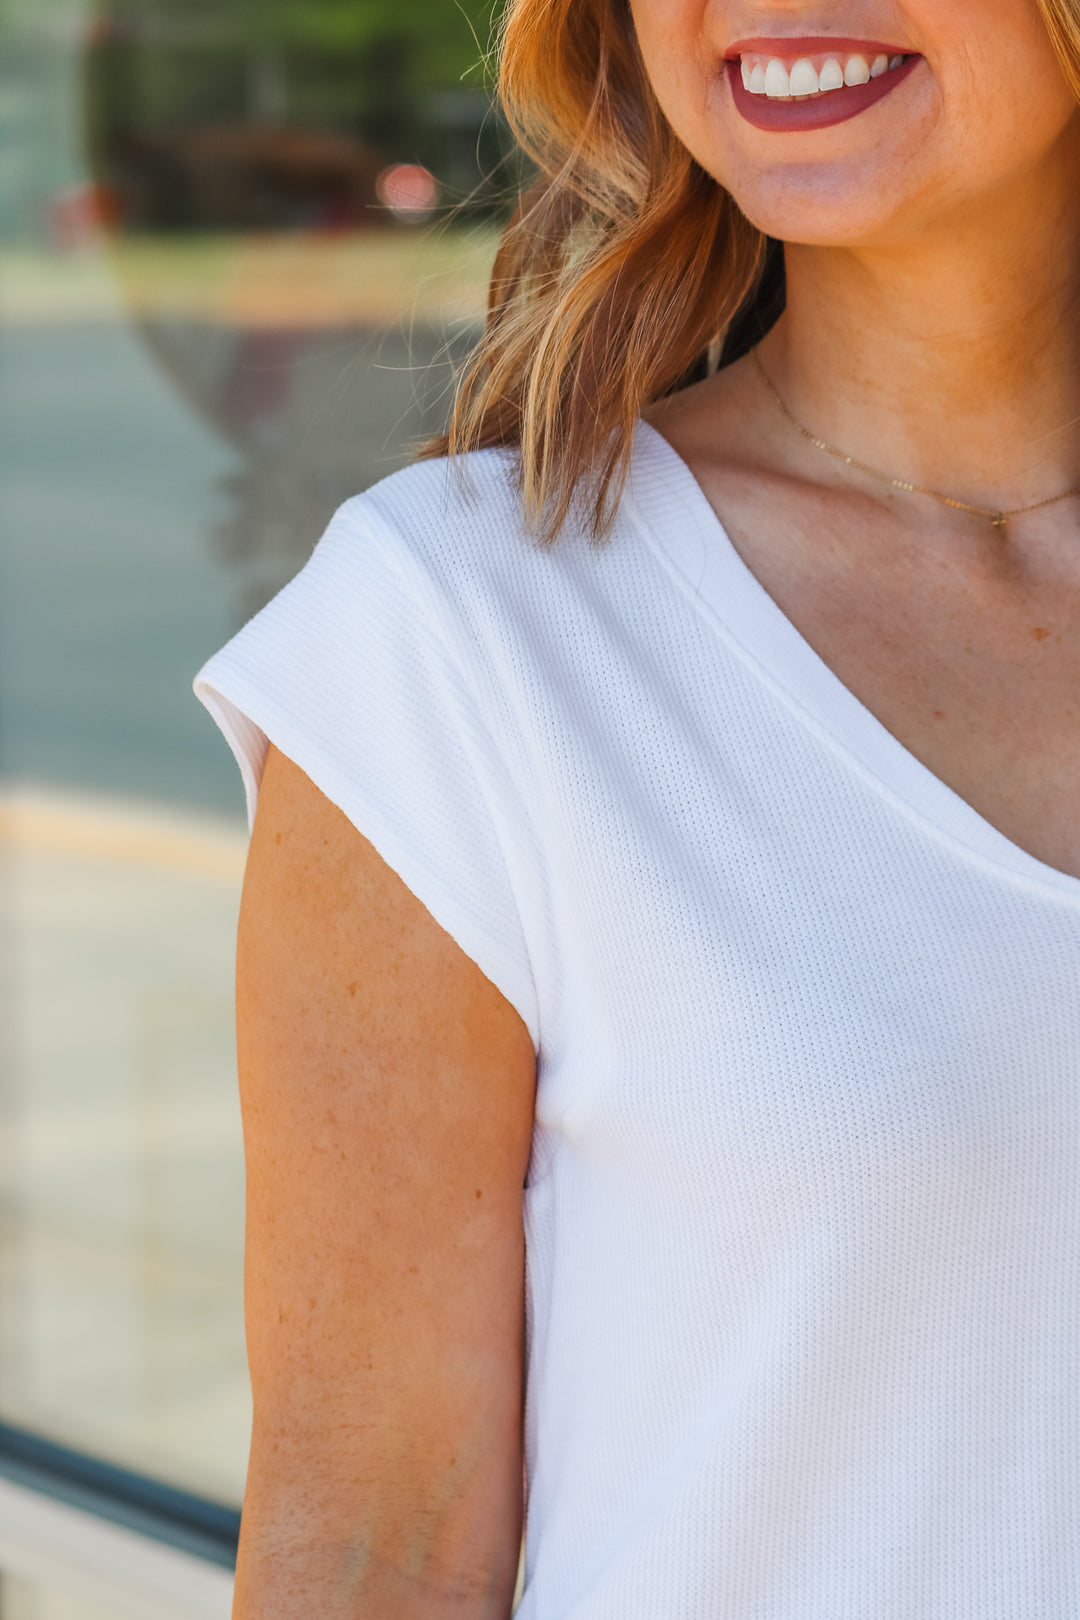 A close up of a woman's shoulder wearing a white shirt.